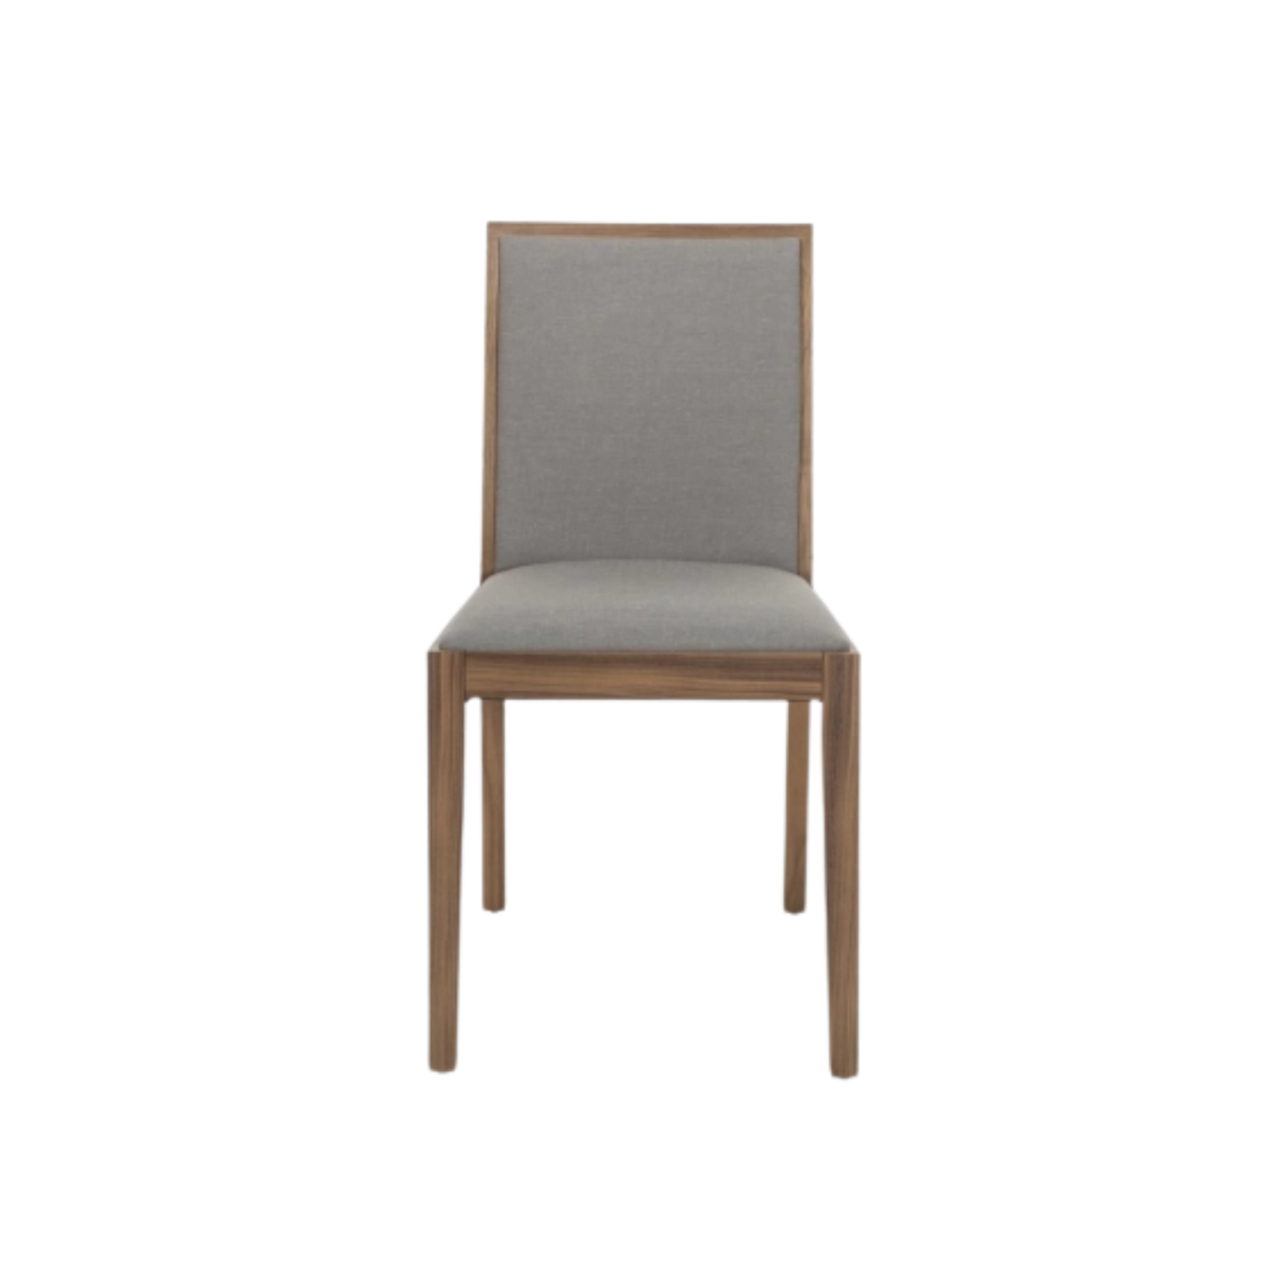 Modern minimal wooden dining chair with contrasting upholstered seat and back